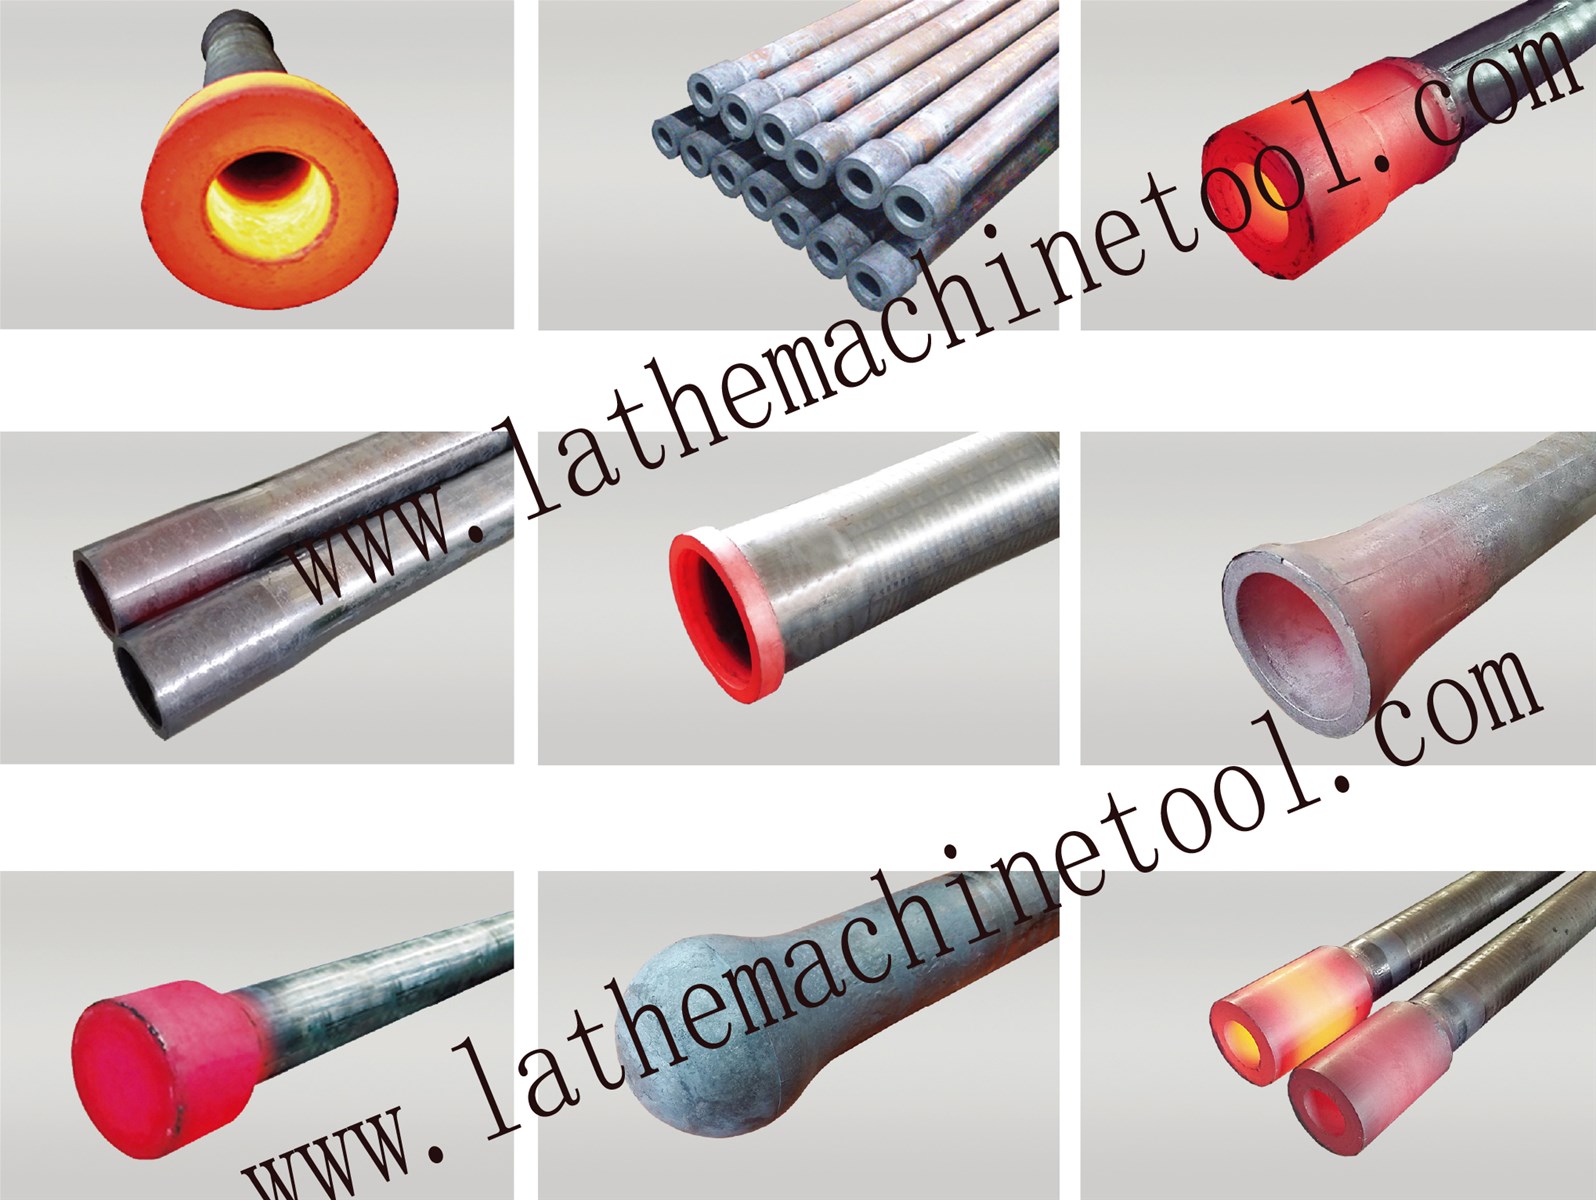 High Efficiency tubular upsetting equipments for Upset Forging of Drill the well for oil pipe